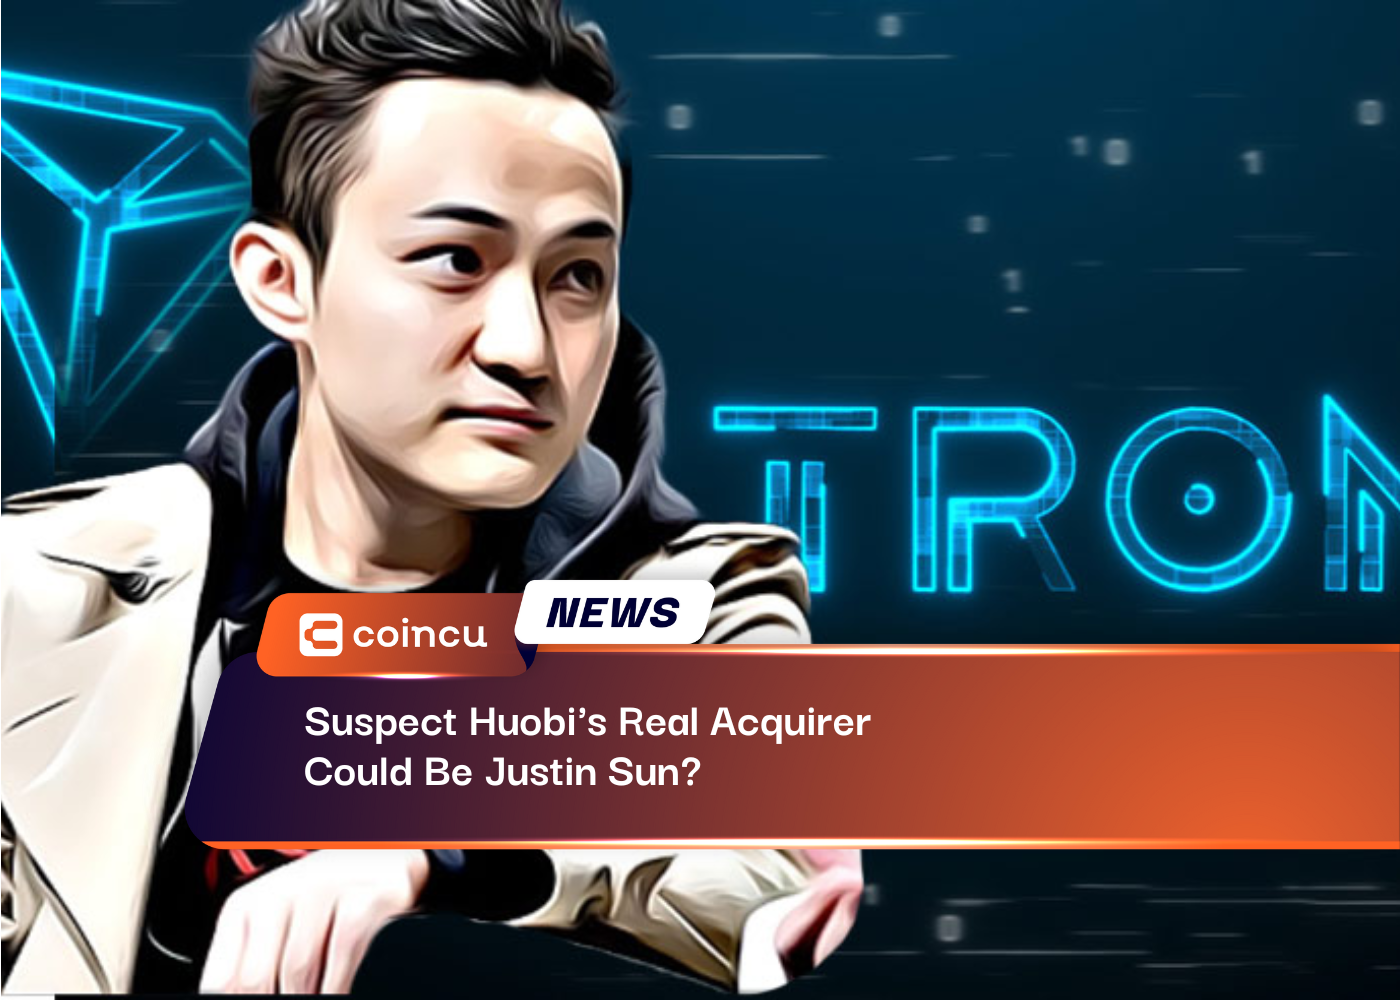 Suspect Huobi's Real Acquirer Could Be Justin Sun?